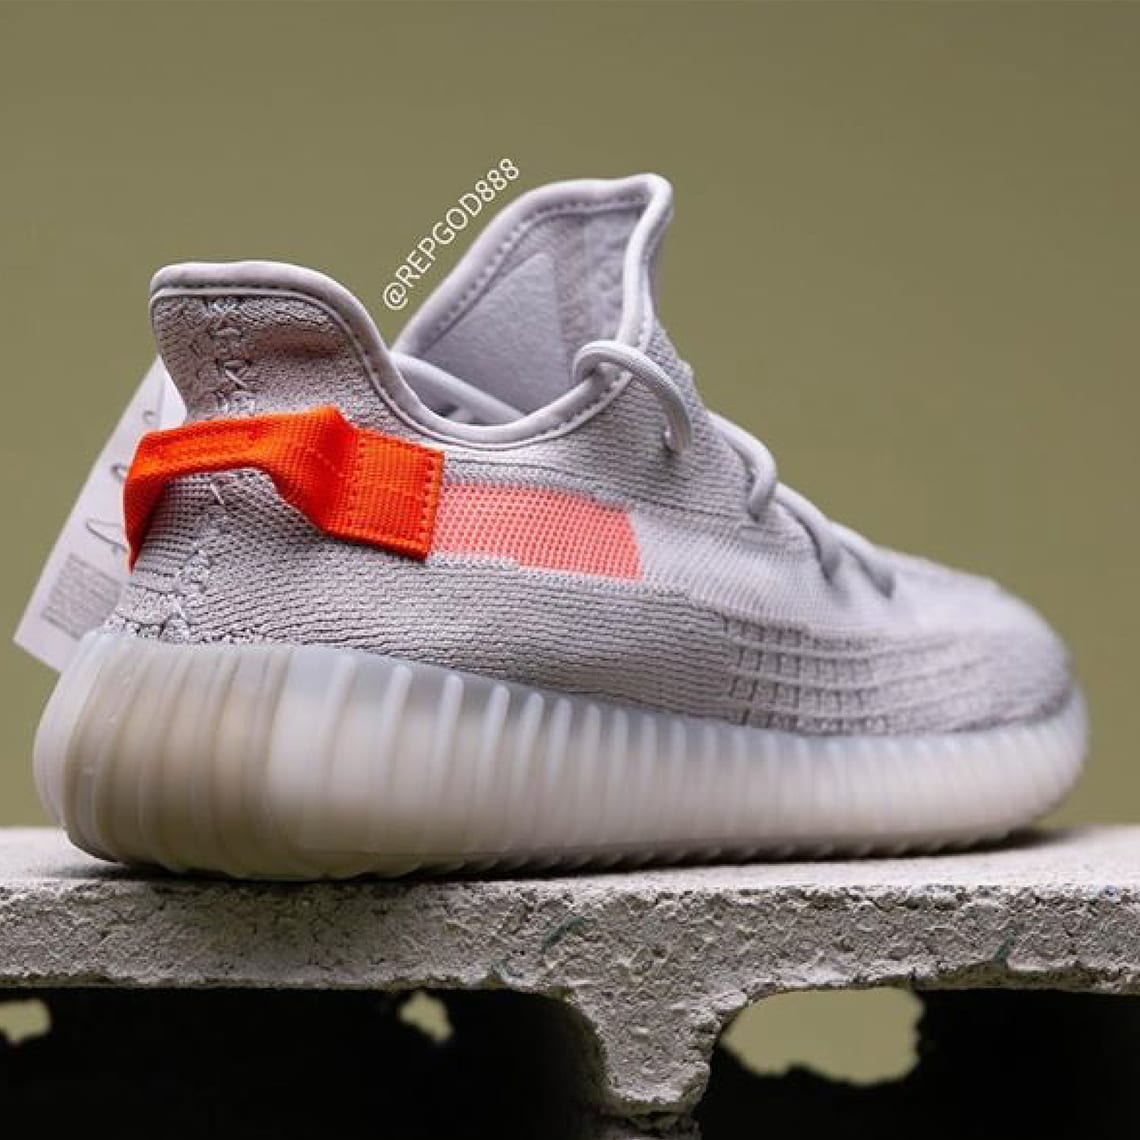  adidas Yeezy Boost 350 V2 Tailgate 2